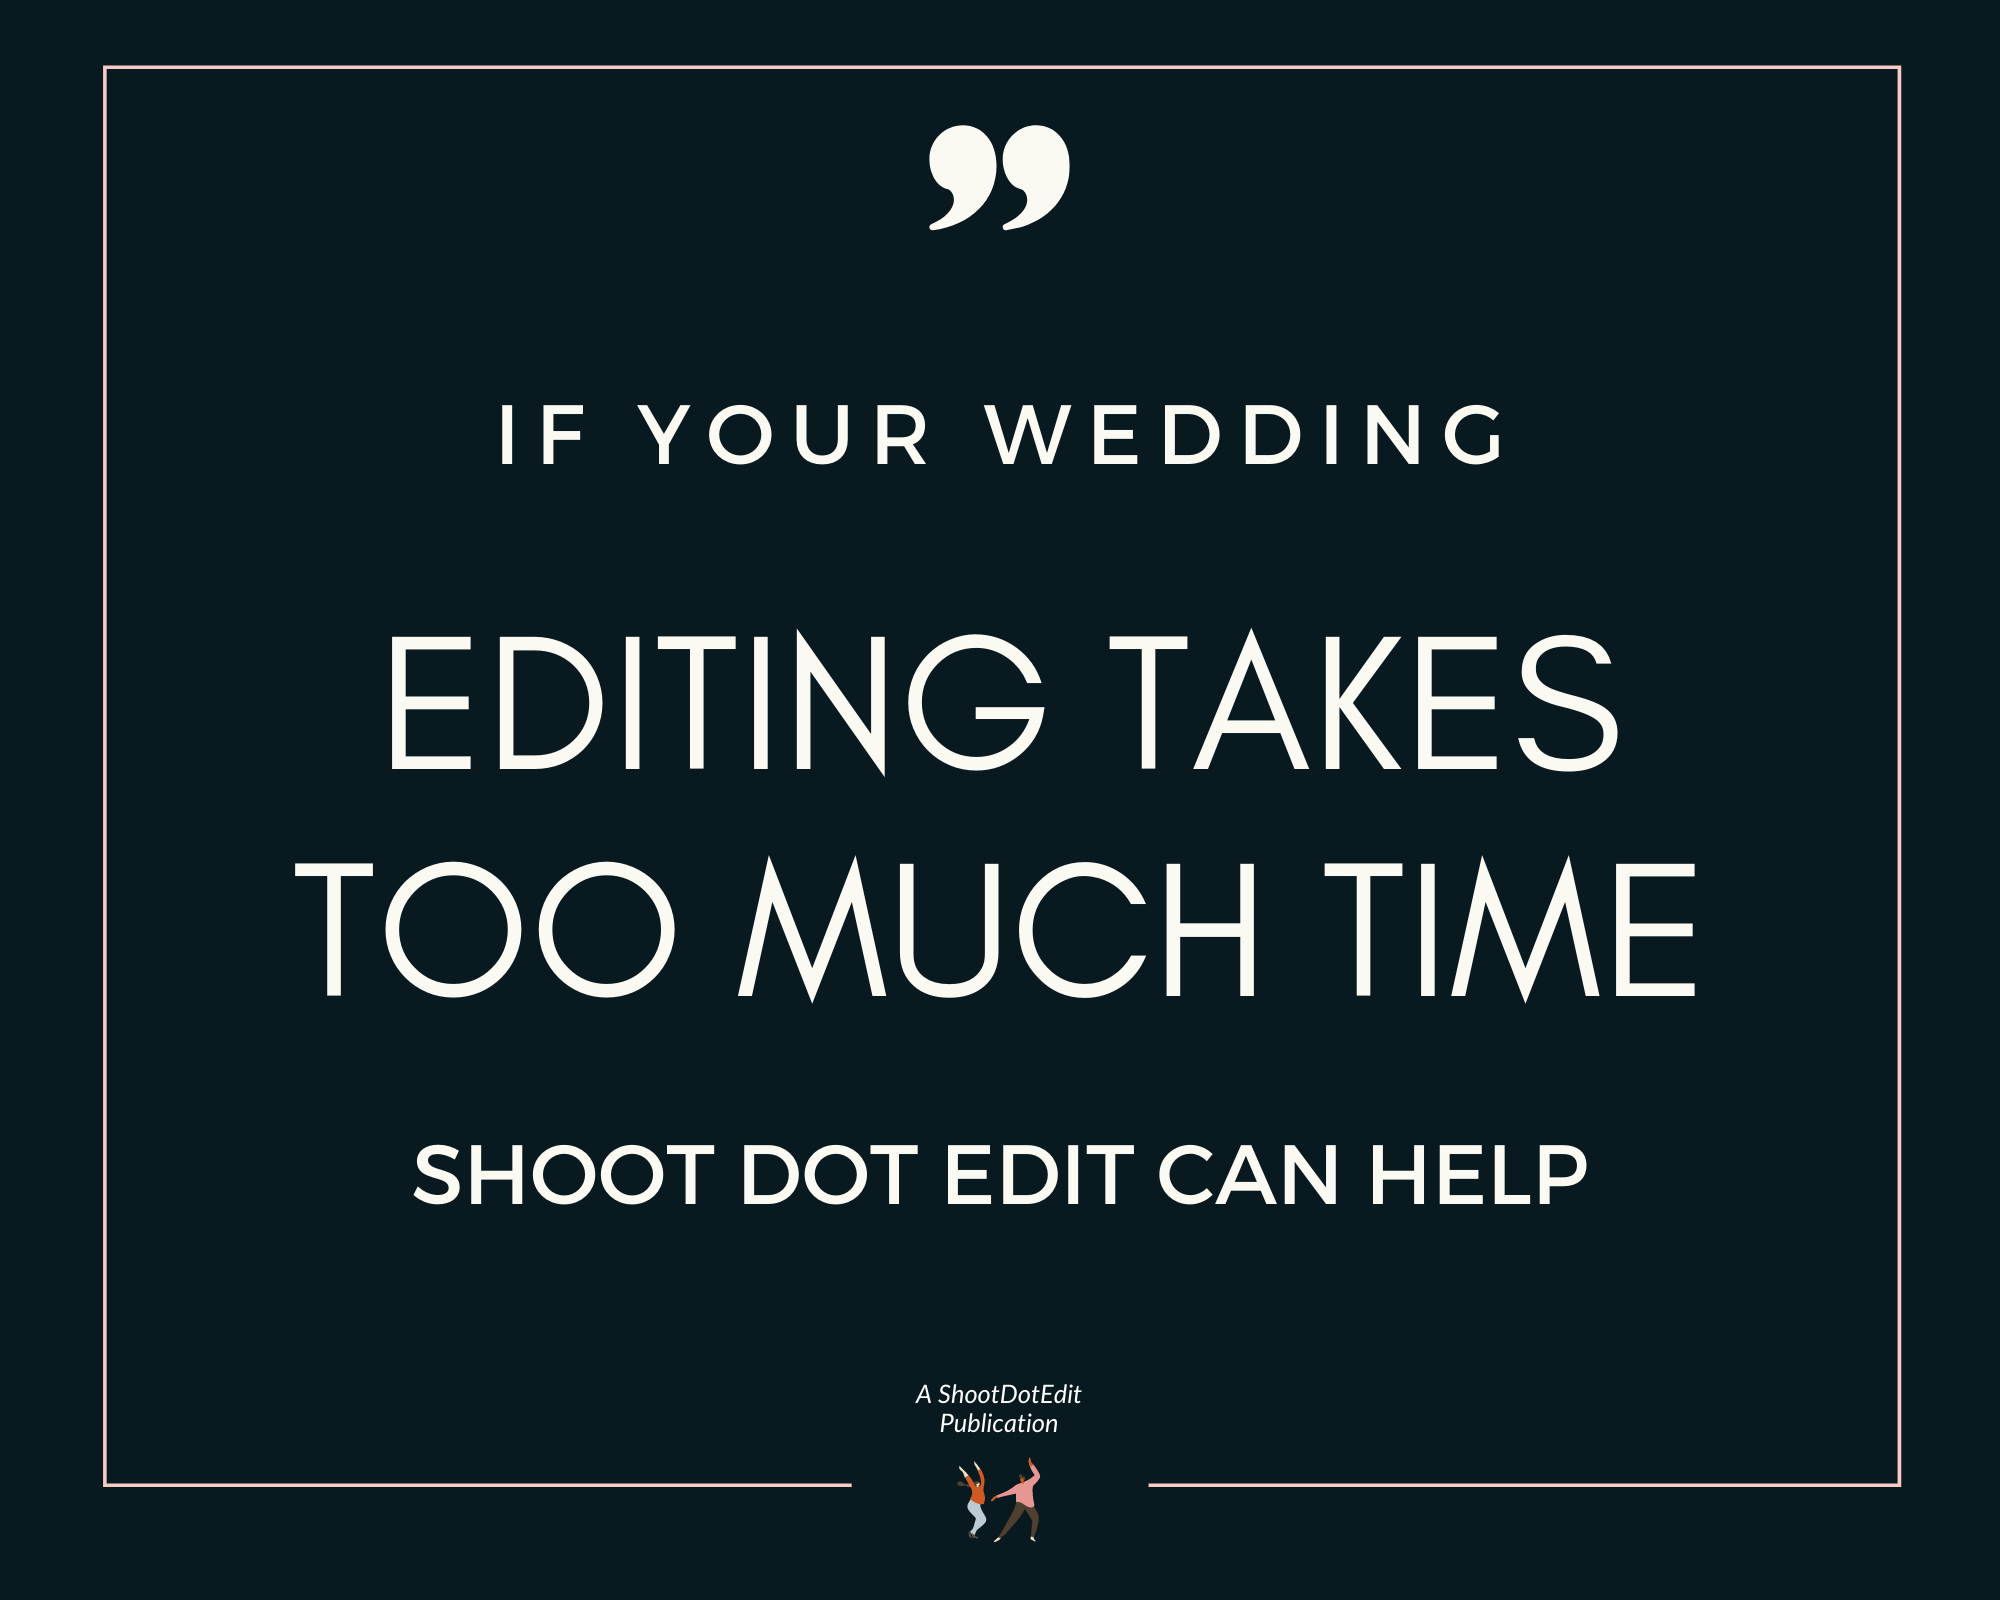 Infographic stating if your wedding editing takes too much time ShootDotEdit can help